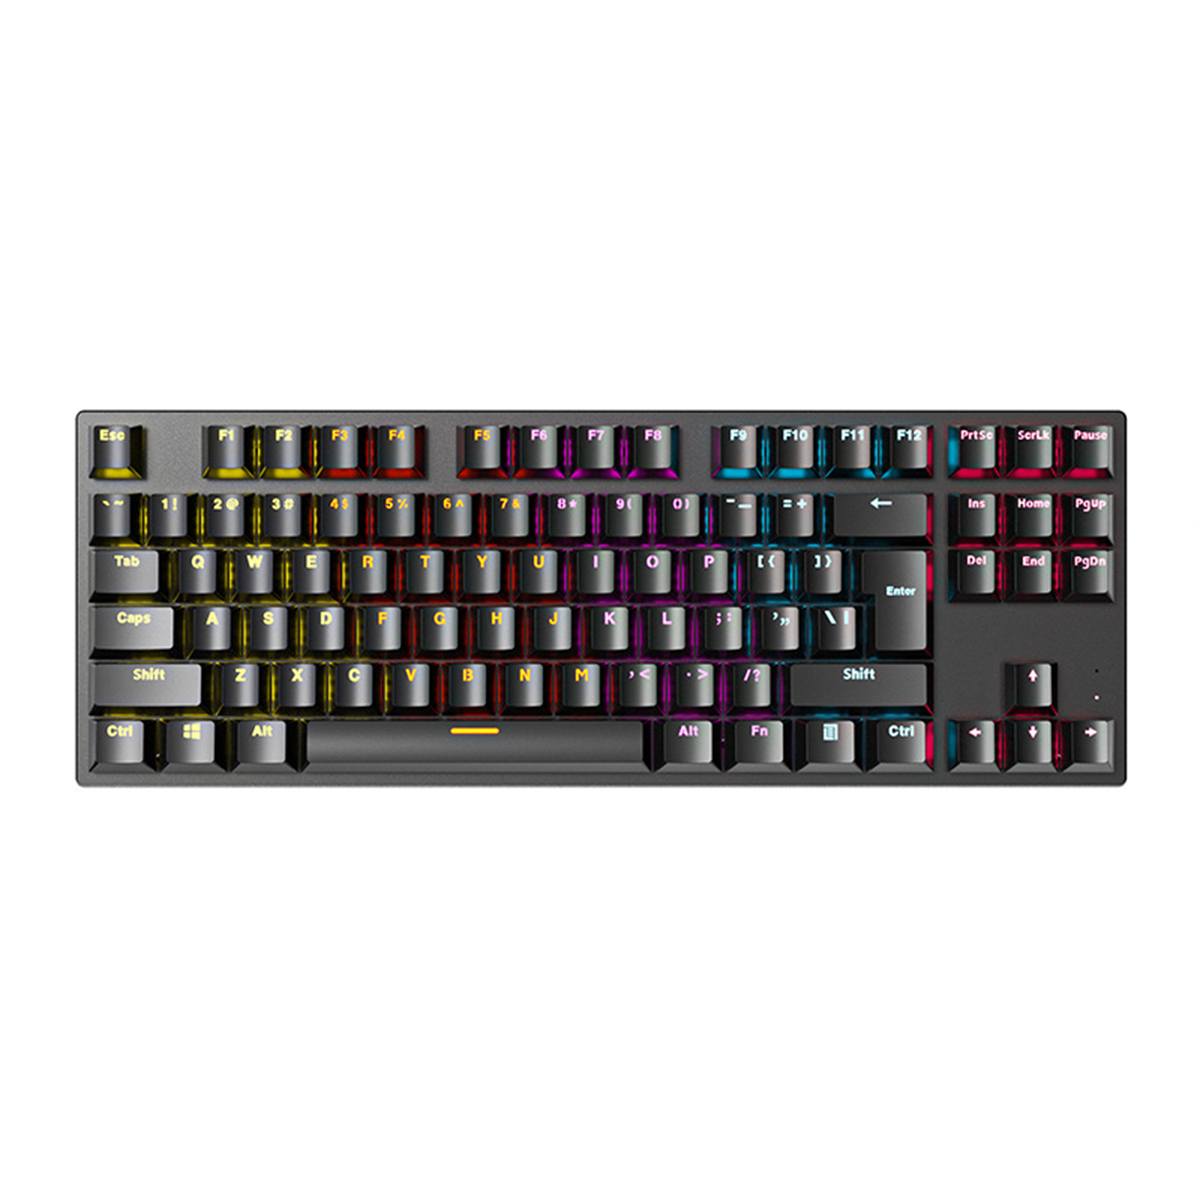 Find KA800 Mechanical Keyboard 87 Keys XA Profile PBT Double shot Molding Keycaps Blue Switch RGB Backlit USB Wired Gaming Keyboard for PC Computer Laptop Gamer for Sale on Gipsybee.com with cryptocurrencies